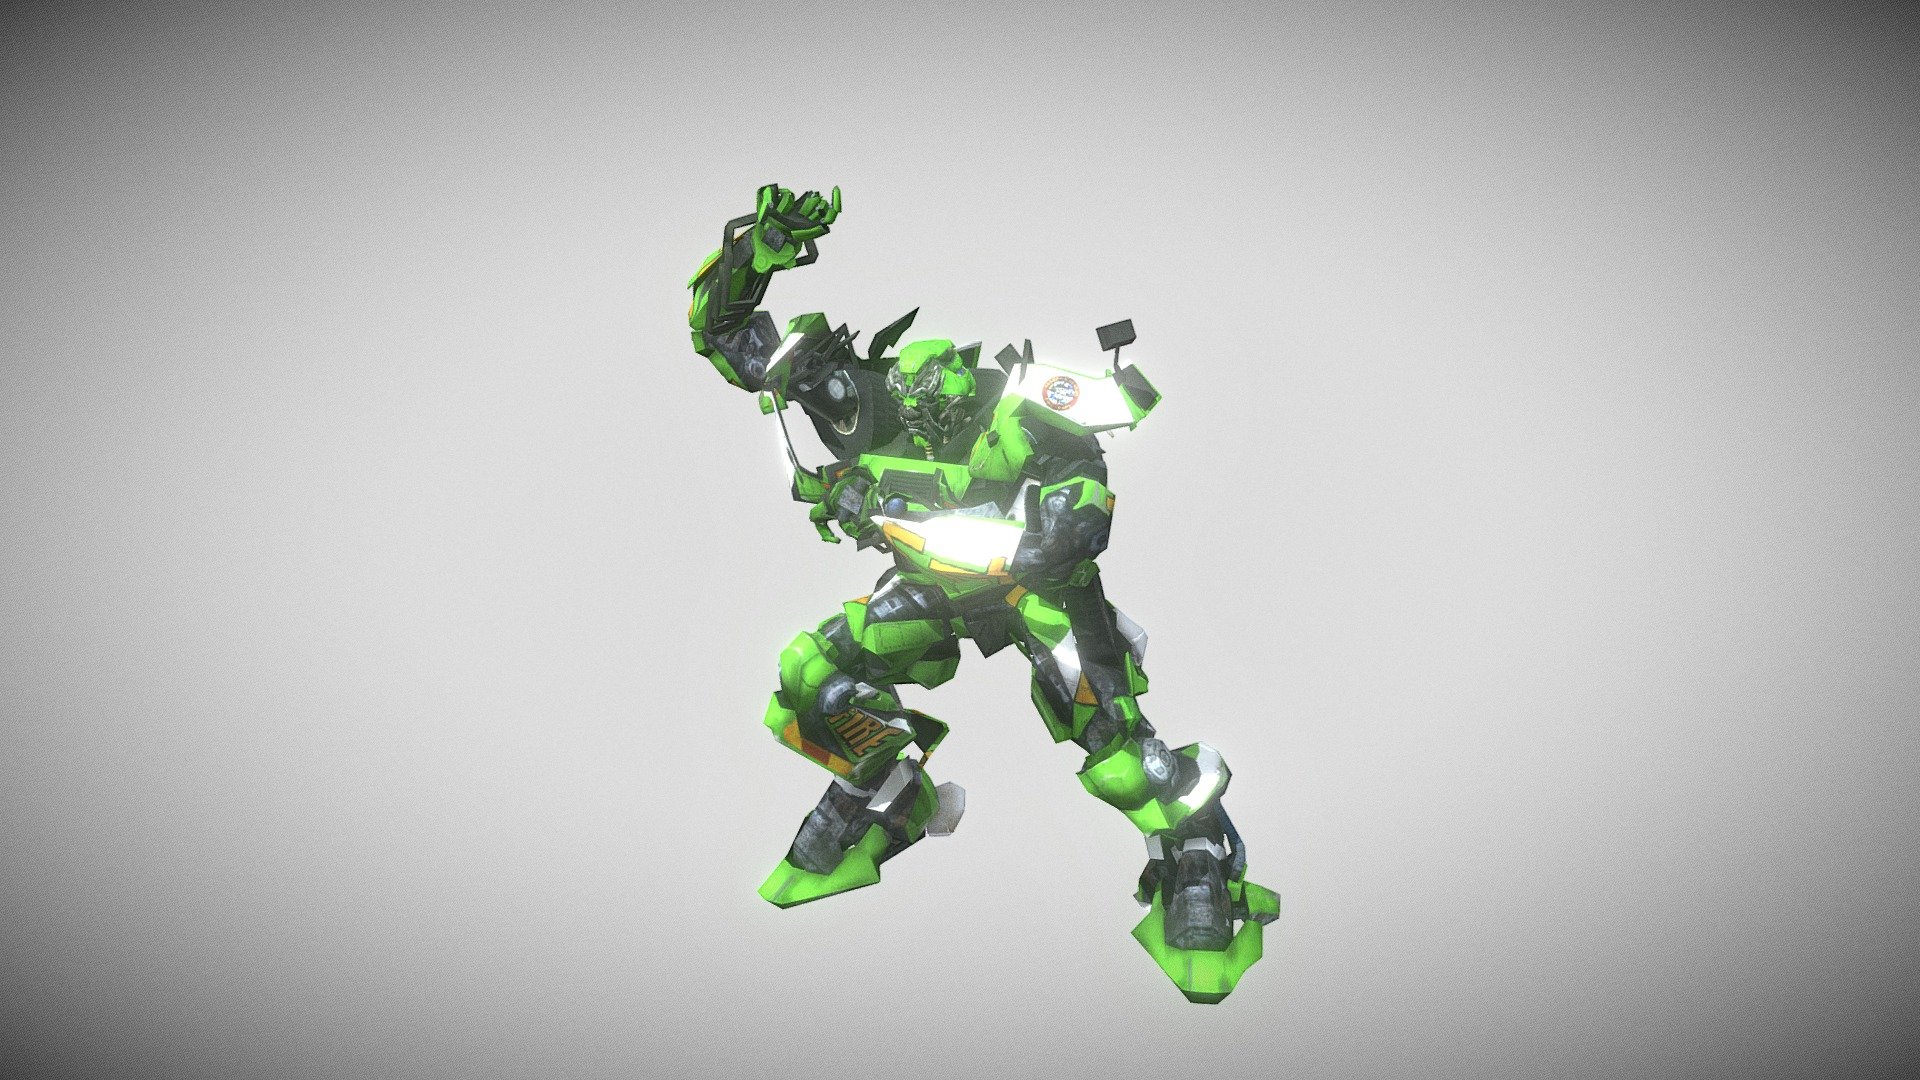 Ratchet of Transformers 3 Modelled and Animated in Blender

Gangumstyle one of my favourite dance poses applied on Ratchet
Hope You all Enjoy!!!! - Ratchet Transformer - 3D model by Jit Debnath (@jitdebnath2442) 3d model